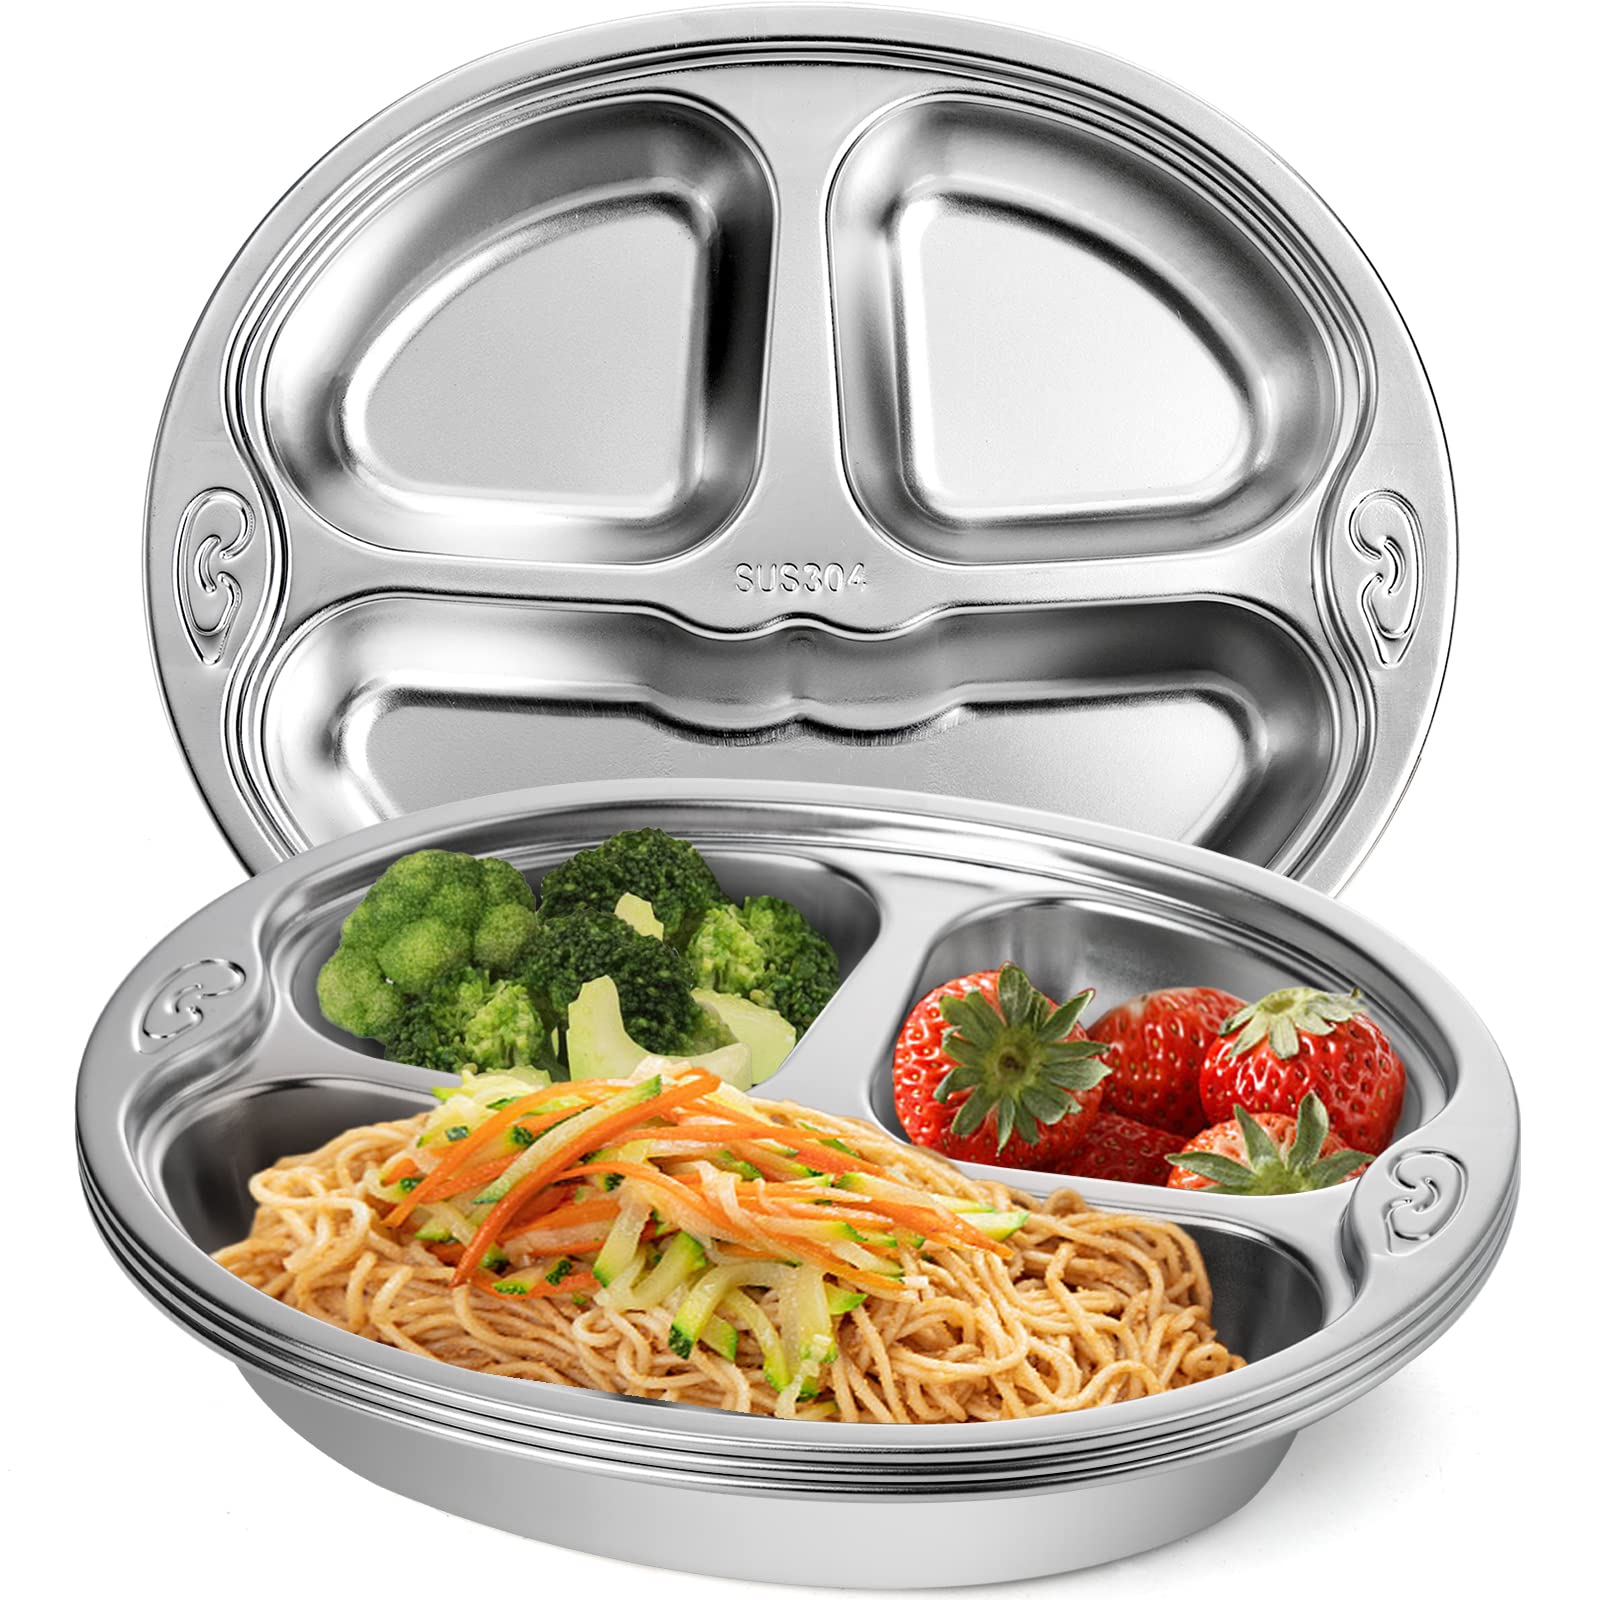 SOUJOY 4 Pack Divided Plate, Stainless Steel Diet Control Dinner Plate, 3 Sections Korean Unbreakable Monkey Shape Compact Food Serving Tray for Kids, Picky Eaters, Campers